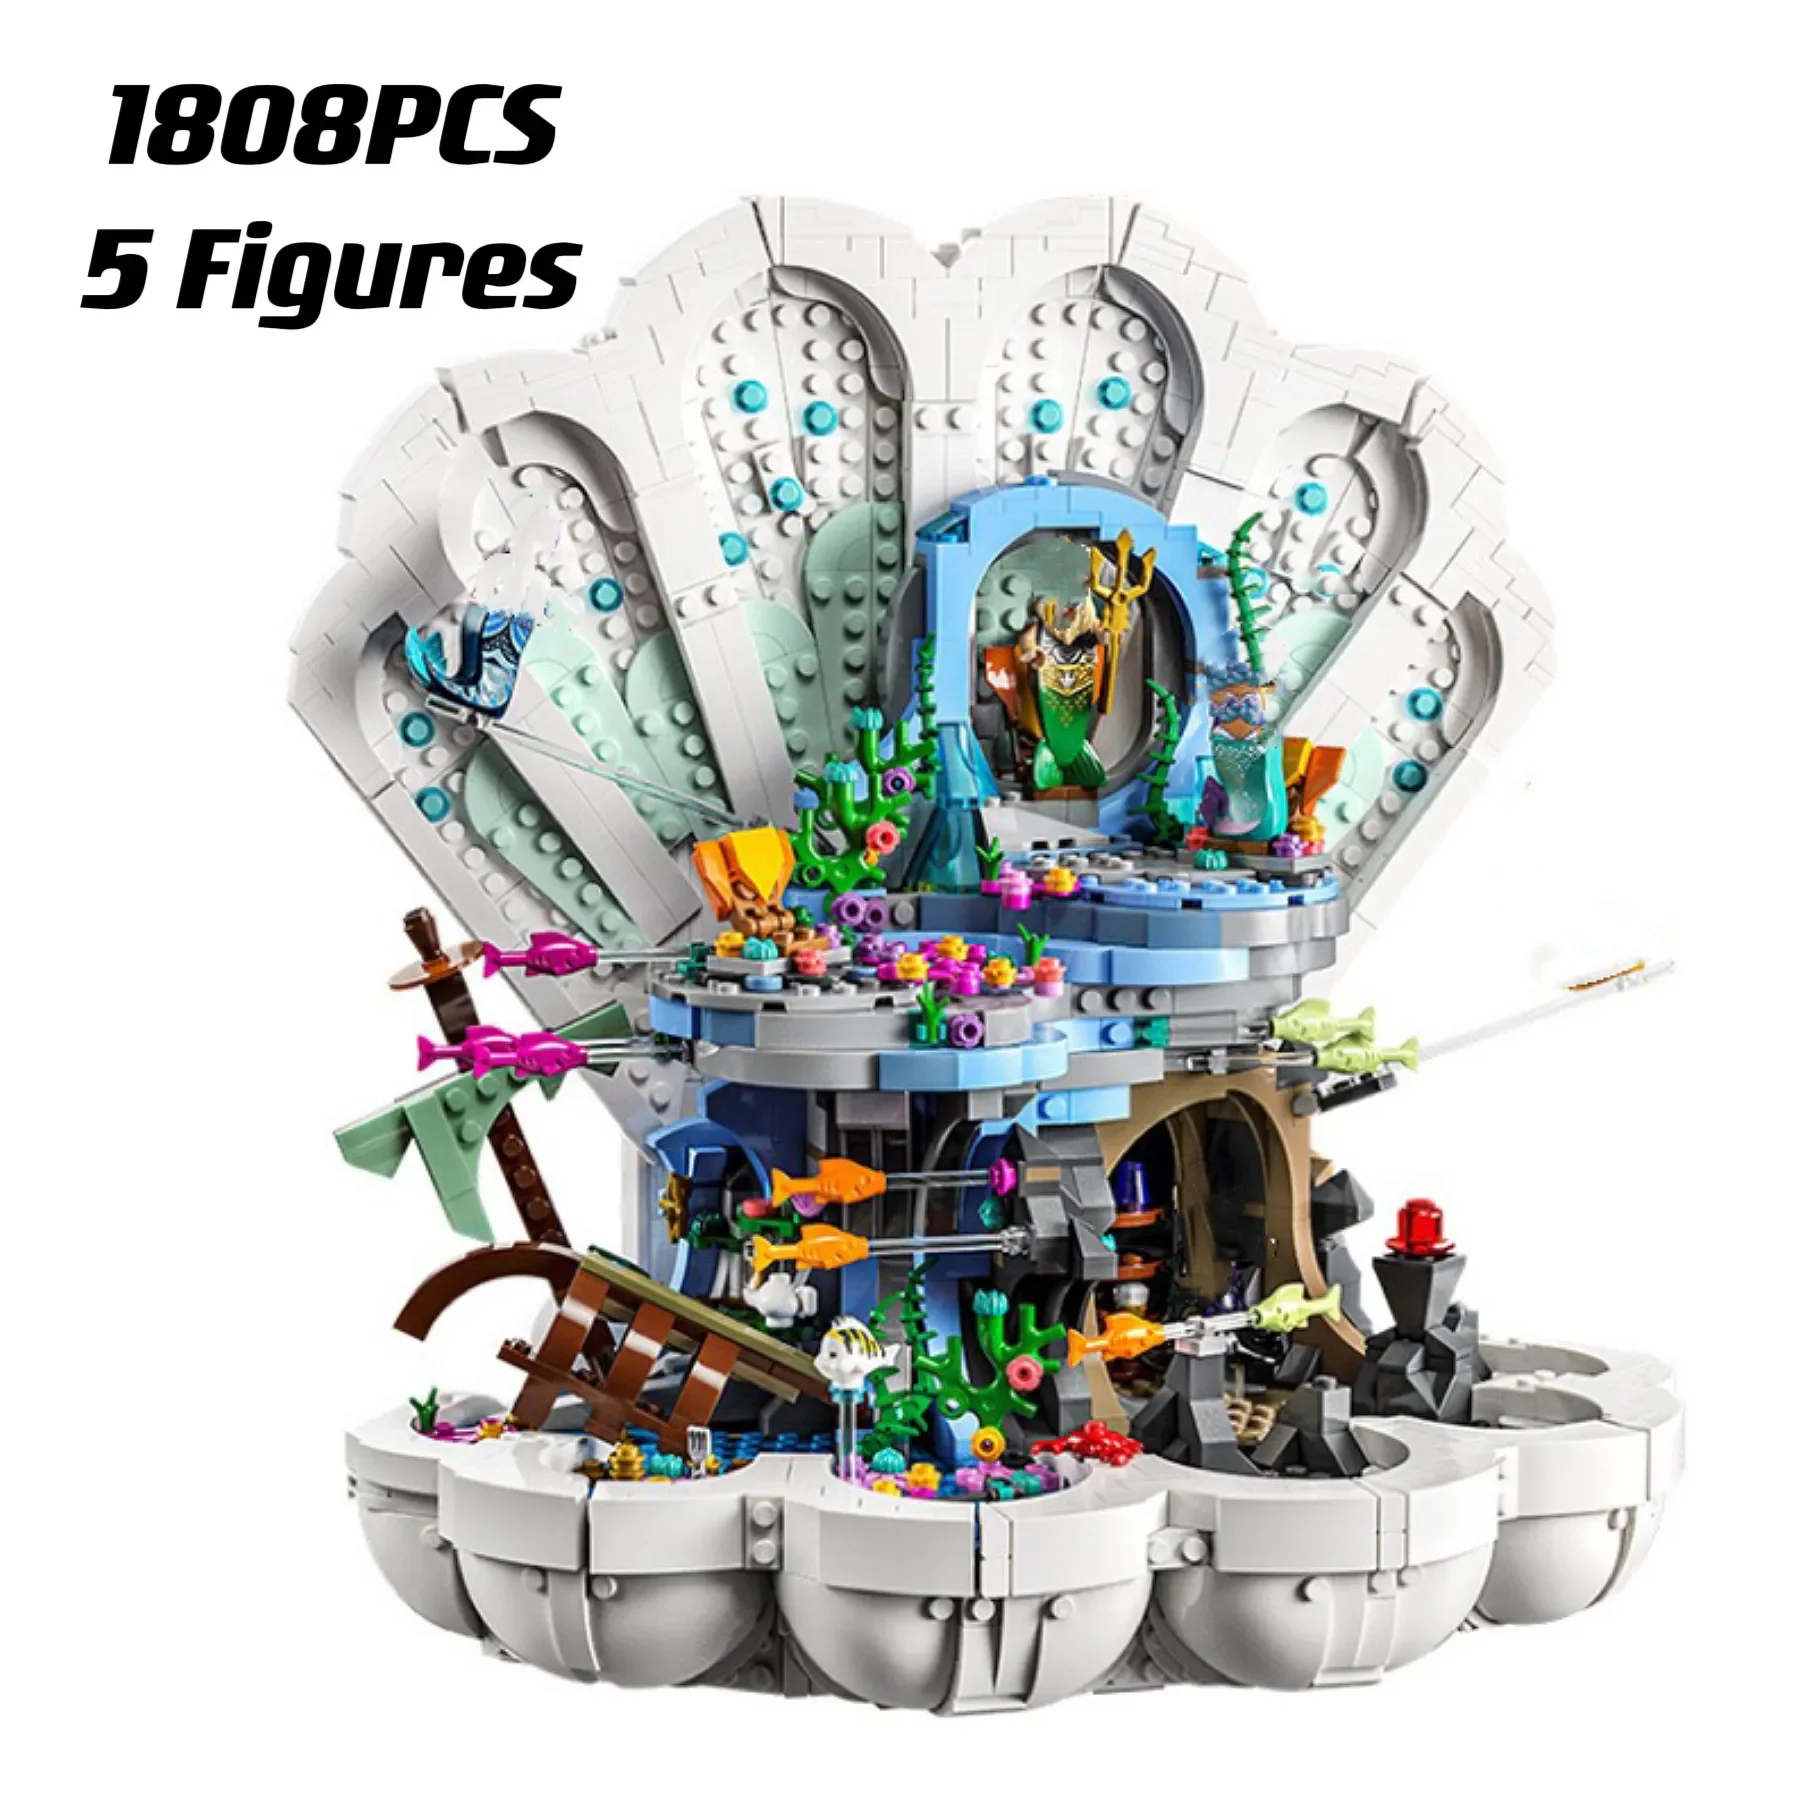 

43225 Royal Clamshell With lighting Building Blocks Undersea Princess Palace Castle Toys for Girls Kids Friends Birthday Gifts